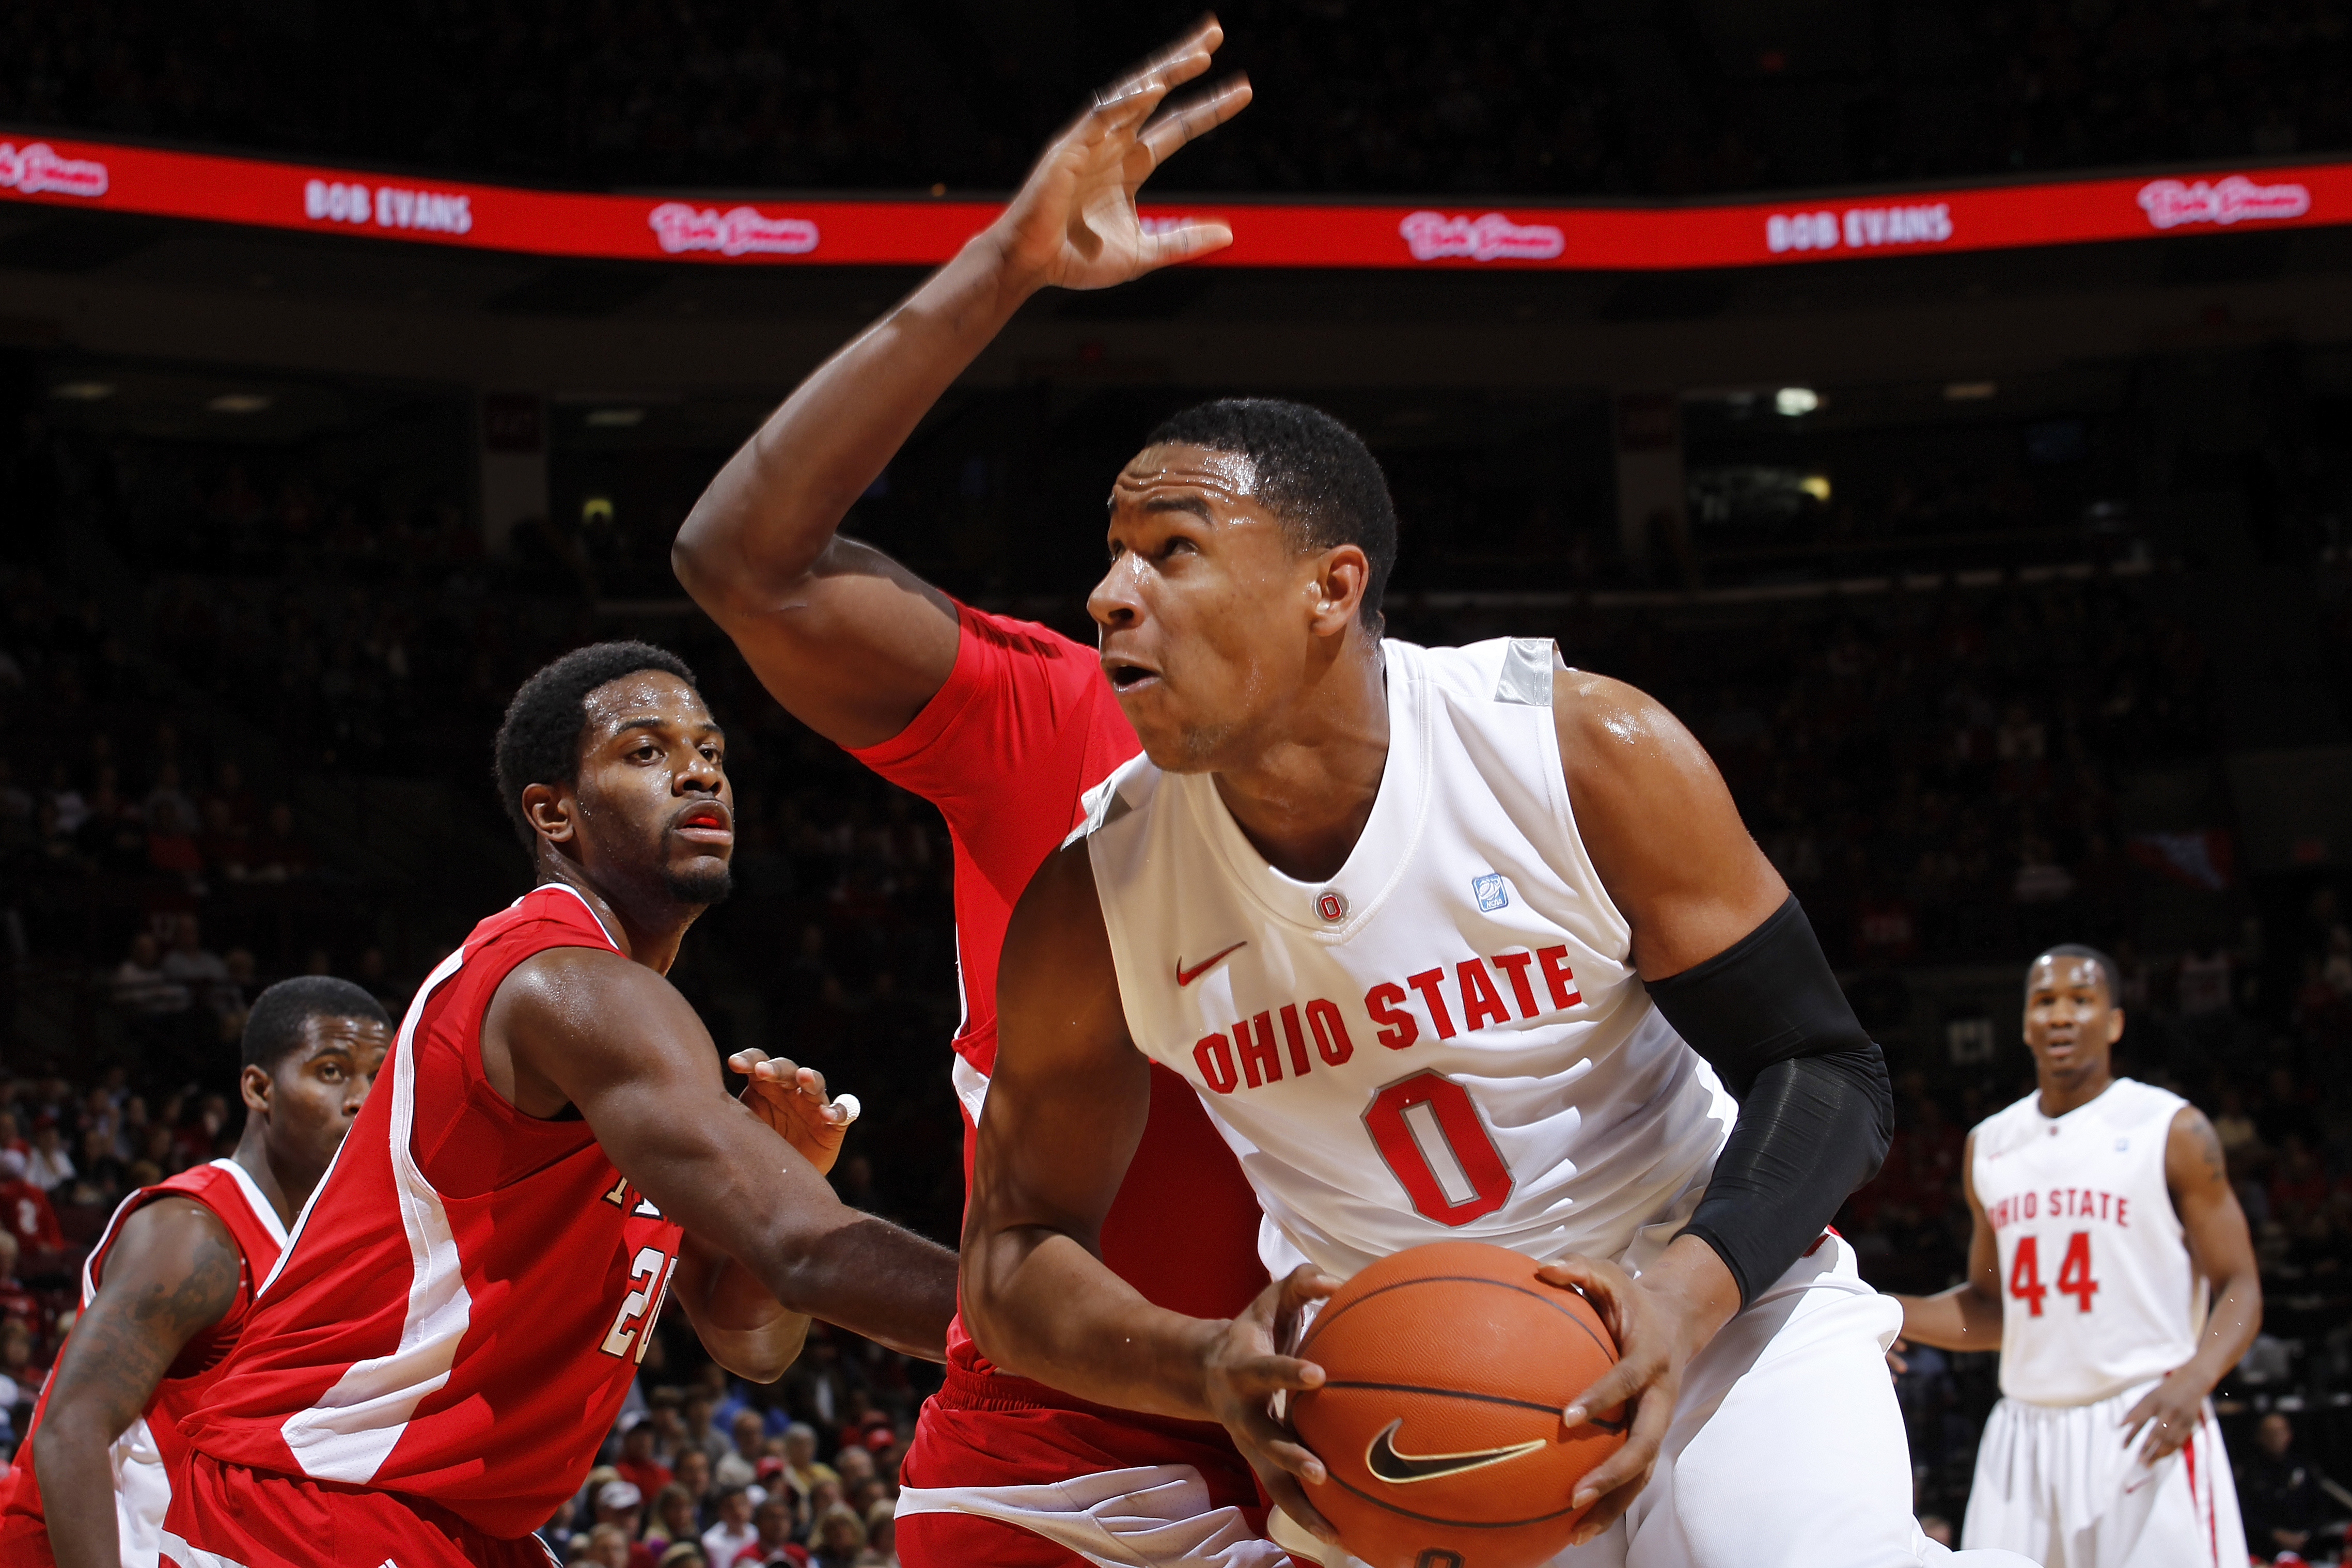 COLUMBUS, OH - NOVEMBER 26: Jared Sullinger #0 of the Ohio State Buckeyes looks to the basket against the Miami RedHawks at Value City Arena on November 26, 2010 in Columbus, Ohio. Ohio State won 66-45. (Photo by Joe Robbins/Getty Images)